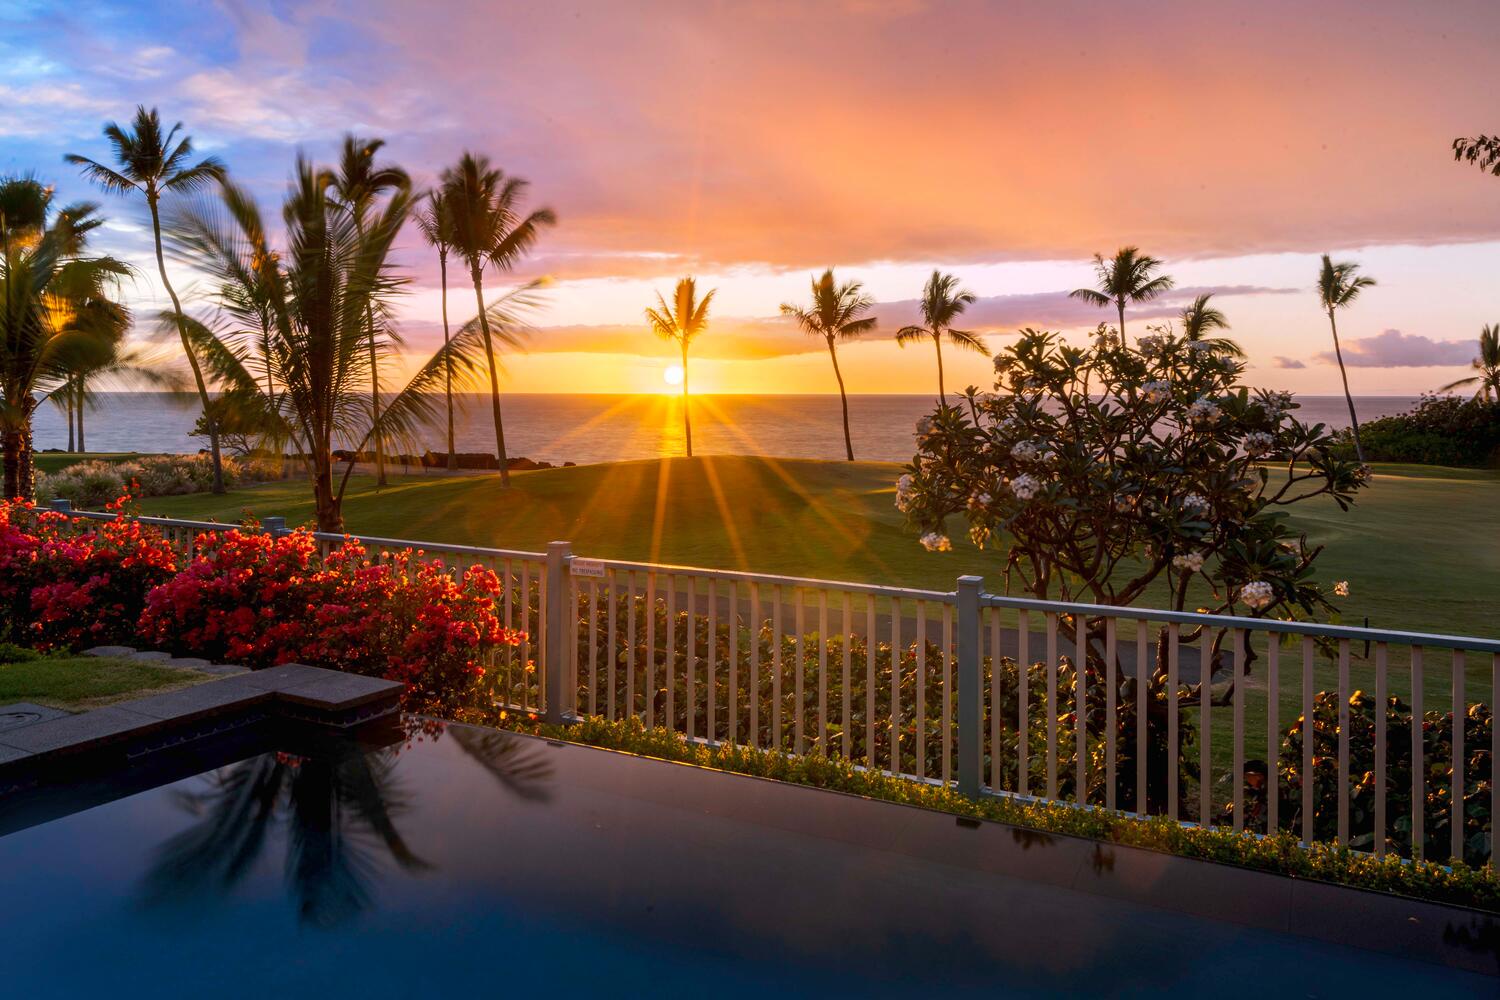 Kailua-Kona Vacation Rentals, Holua Kai #26 - Breathtaking sunset view from a backyard pool, framed by palm trees and vibrant flowers, offering a perfect end to the day.